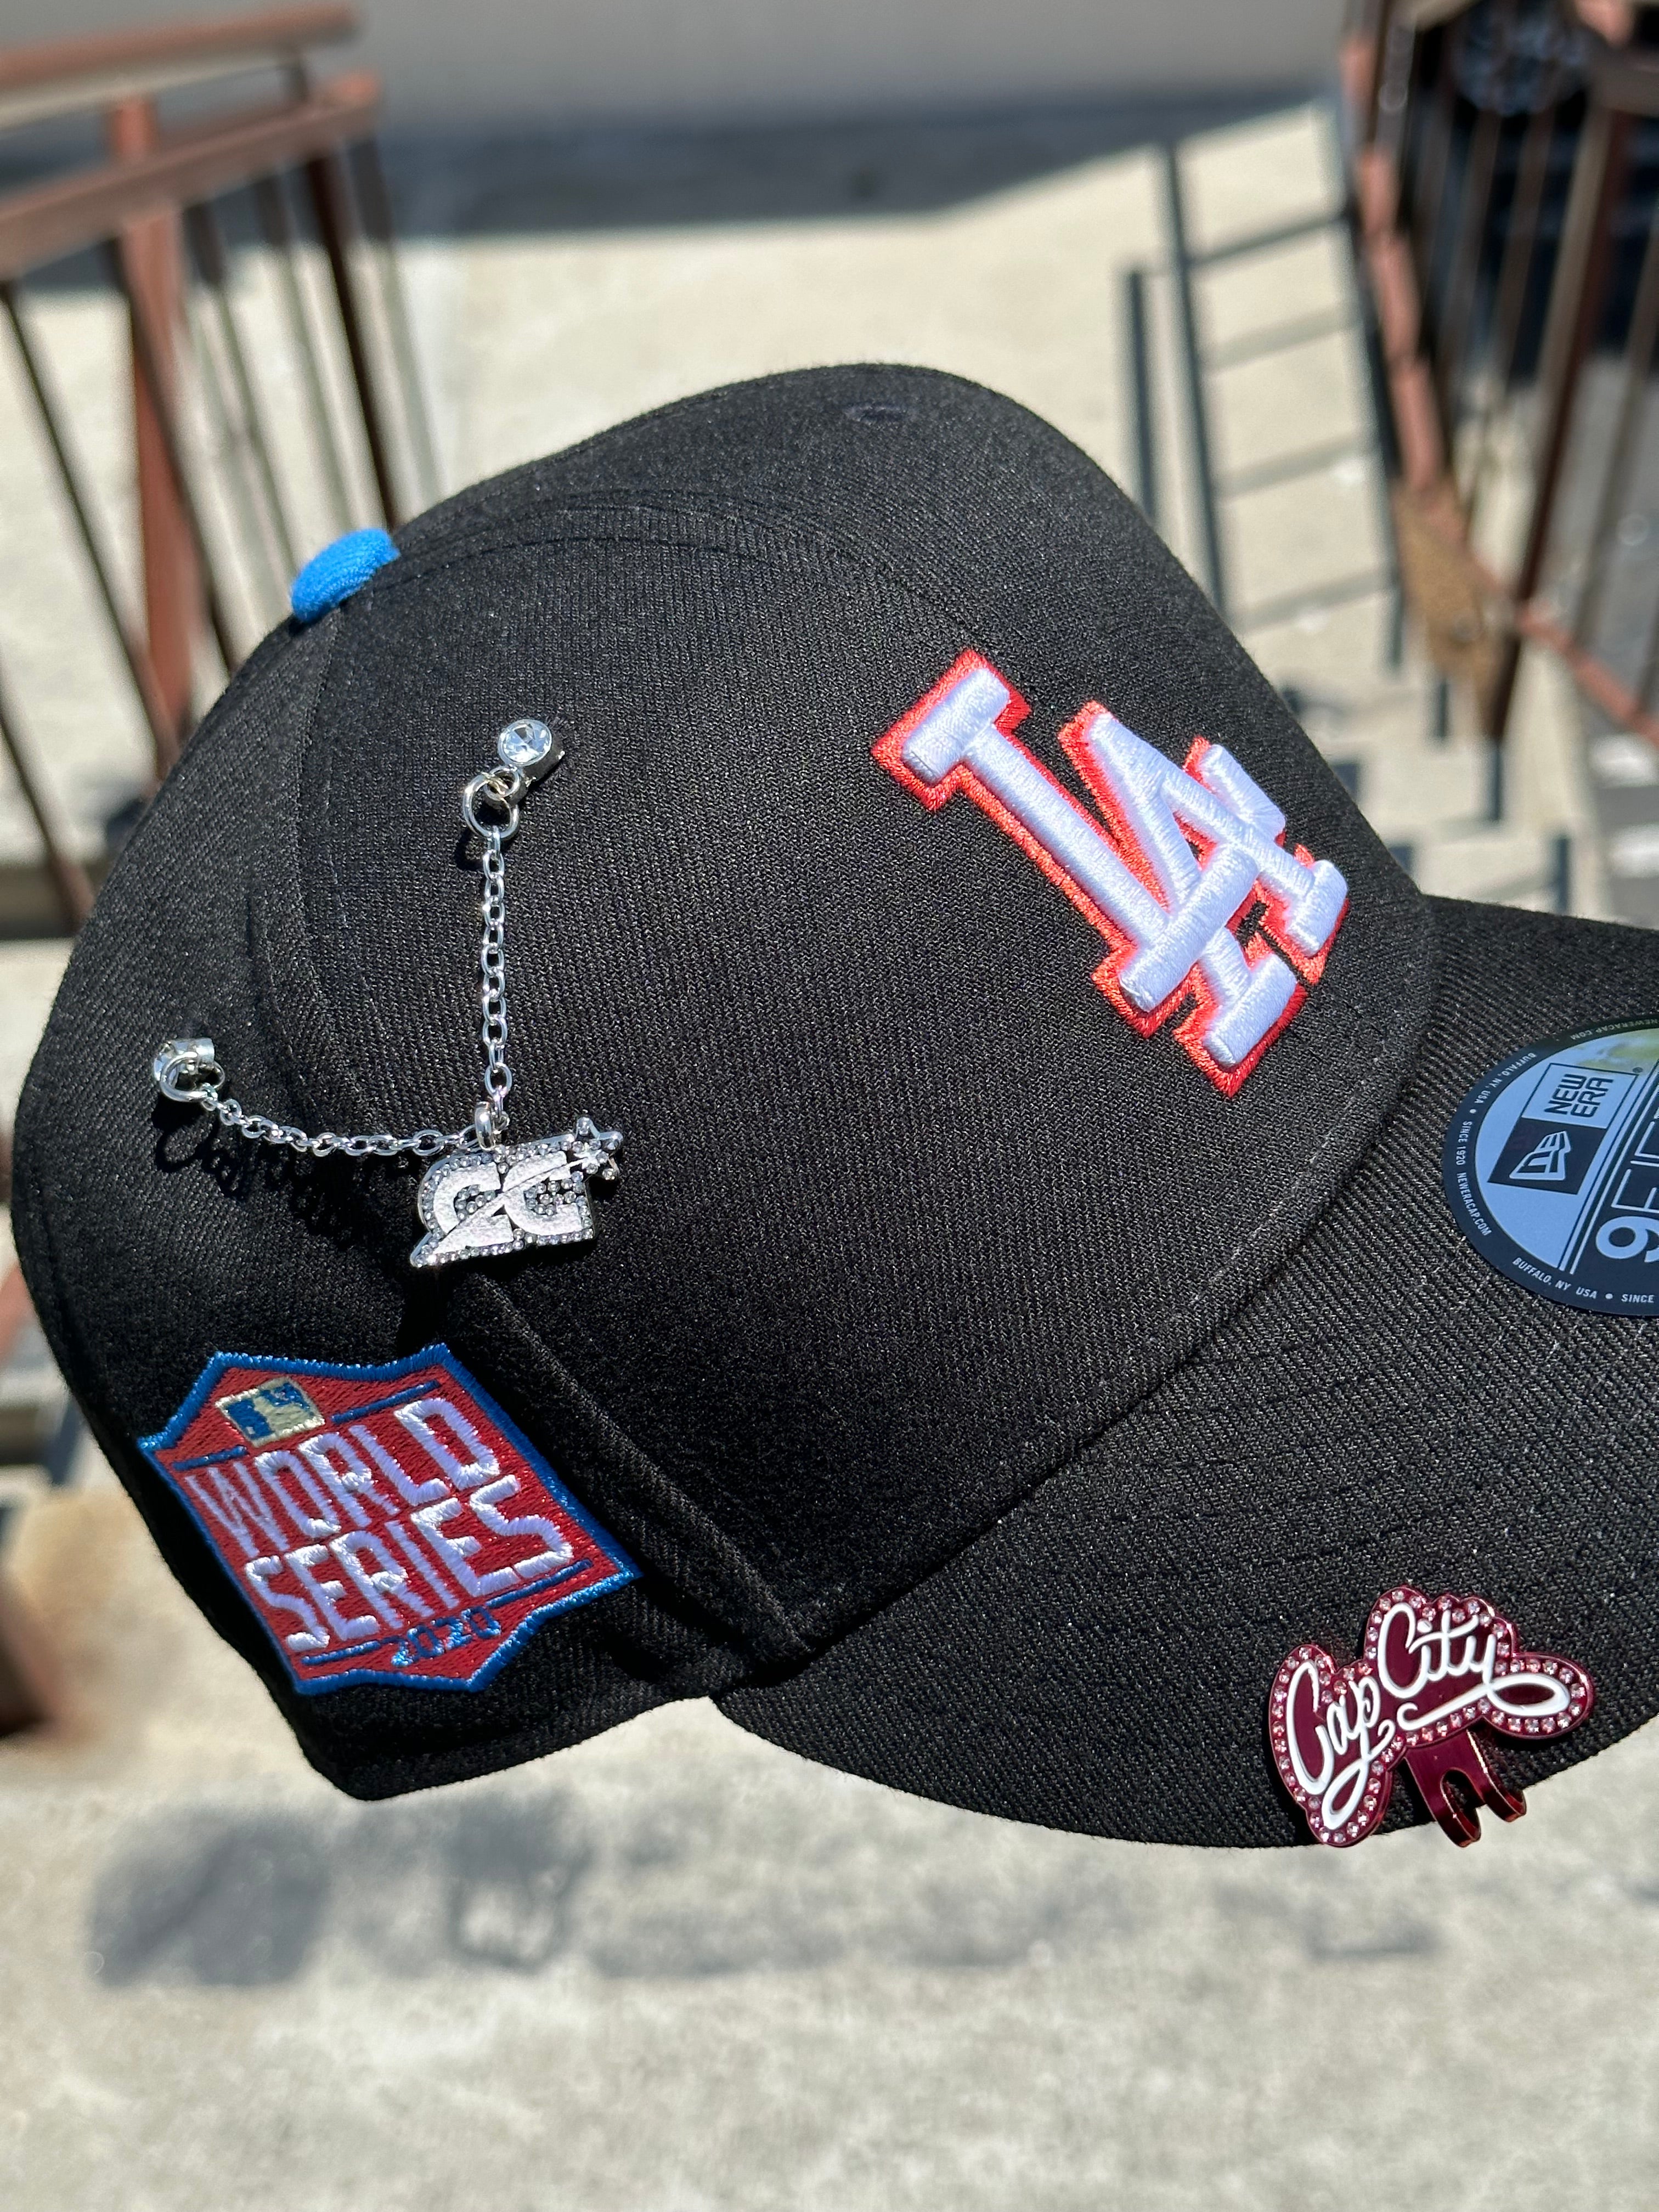 NEW ERA EXCLUSIVE 9FIFTY BLACK LOS ANGELES DODGERS SNAPBACK W/ 2020 WORLD SERIES PATCH